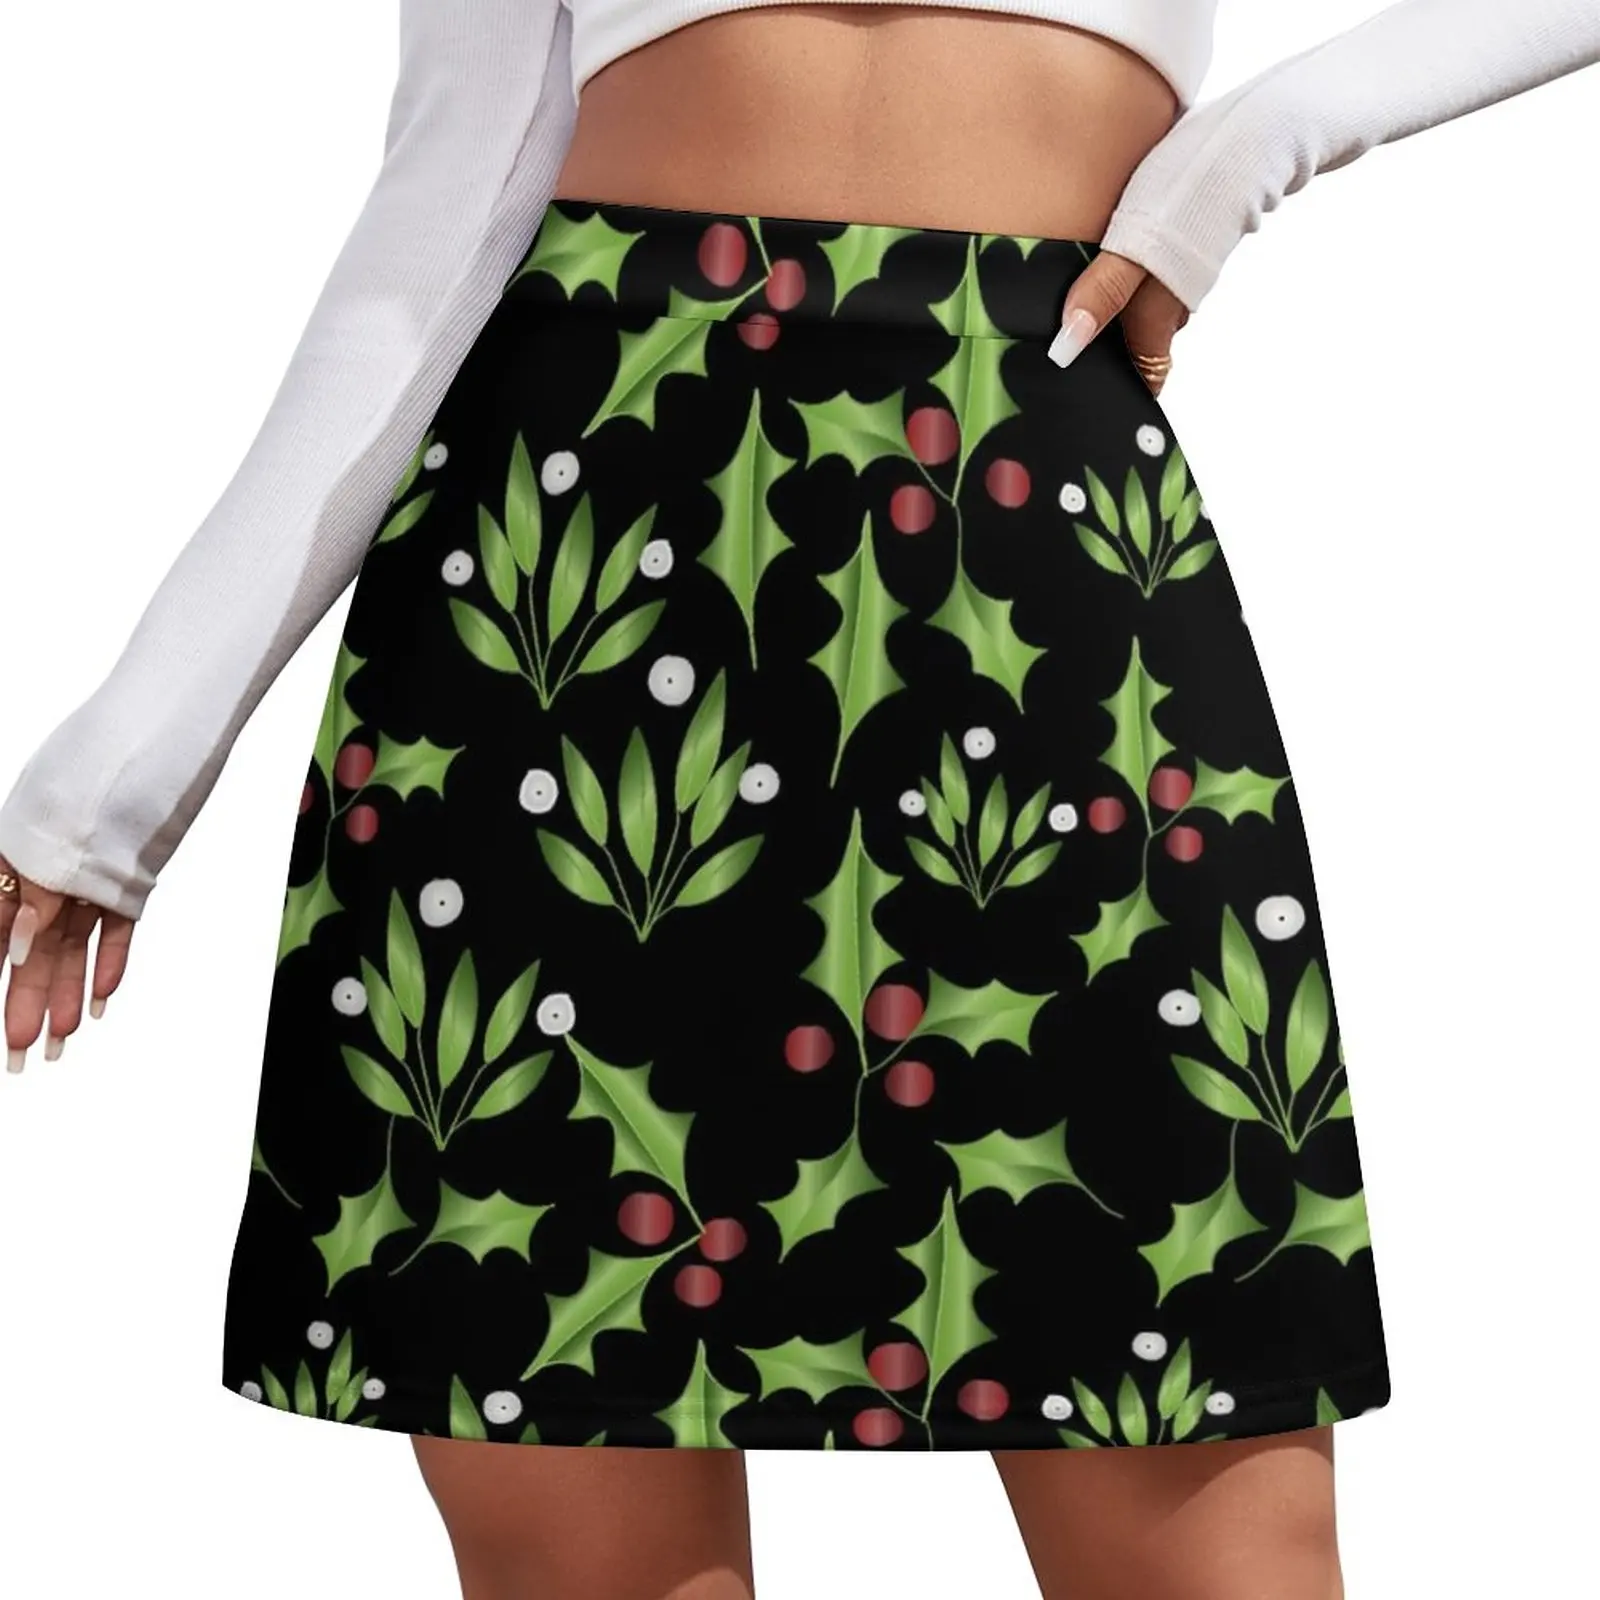 fashionable and stylish lapel shirt high waisted flared pants two piece set for tall and slender girls available in stock Mistletoe and Ilex Mini Skirt Short skirts Skirt for girls women's stylish skirts